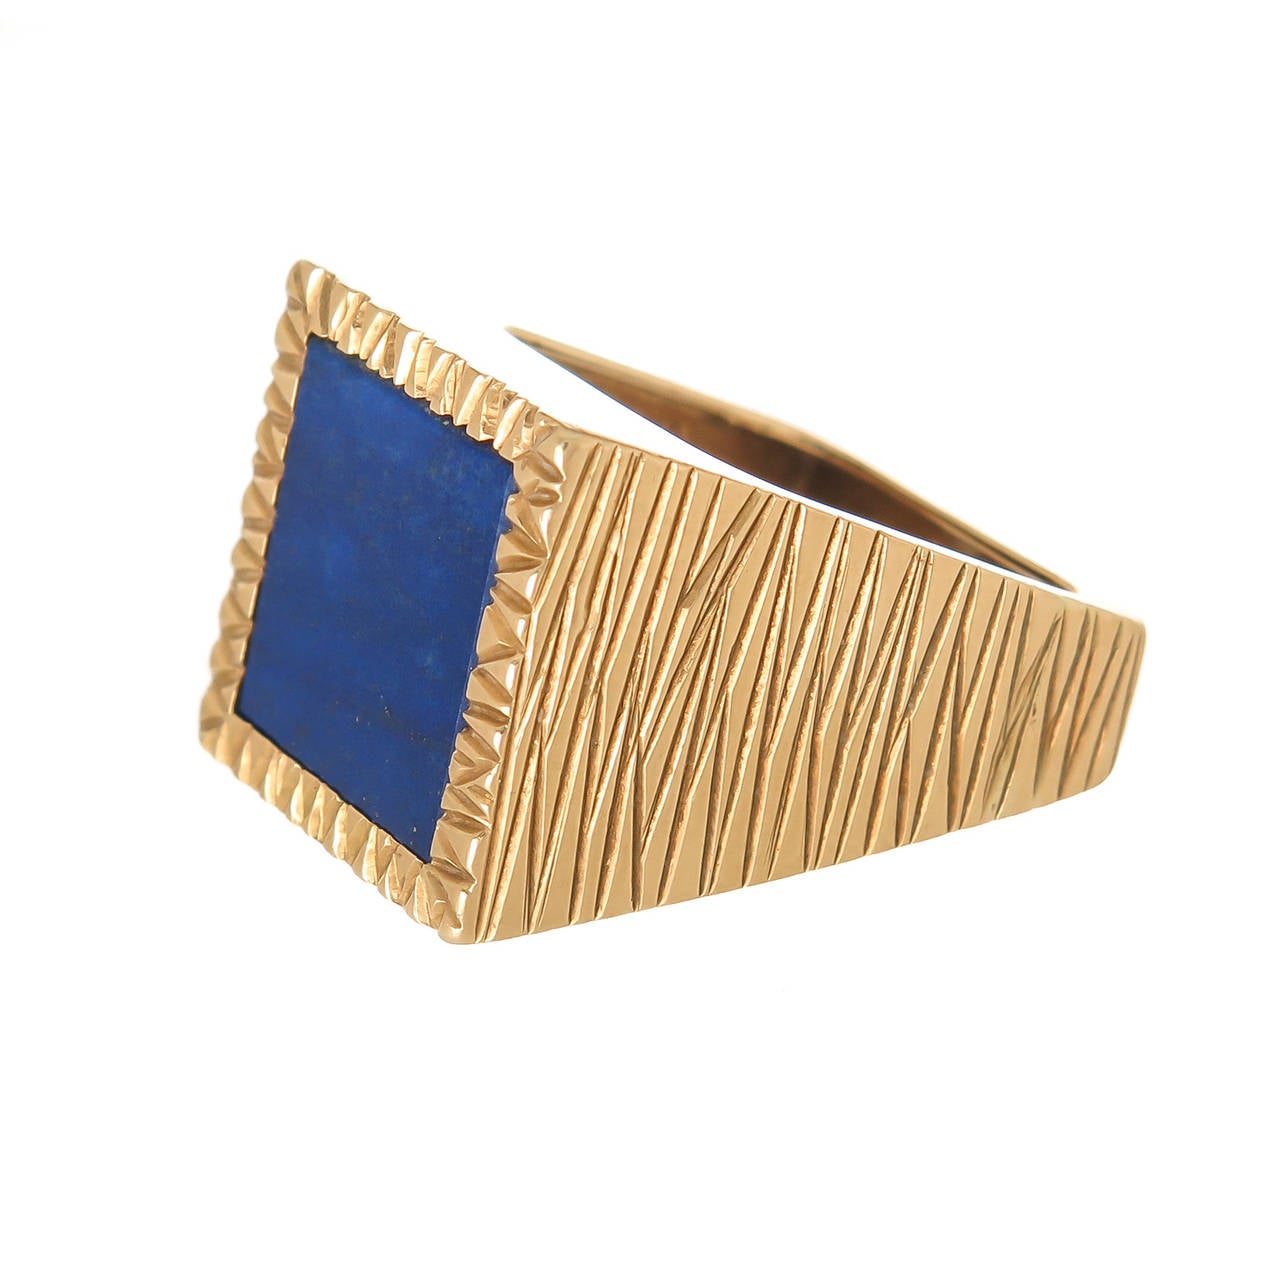 Circa 1970 Andrew Grima 18K Yellow Gold and Lapis Lazuli Ring,  in a square design with textured and smooth sides, teyured top and centrally set with a fine color Lapis. Top measures 3/4  X  3/4 inch. Finger Size = 6 1/2